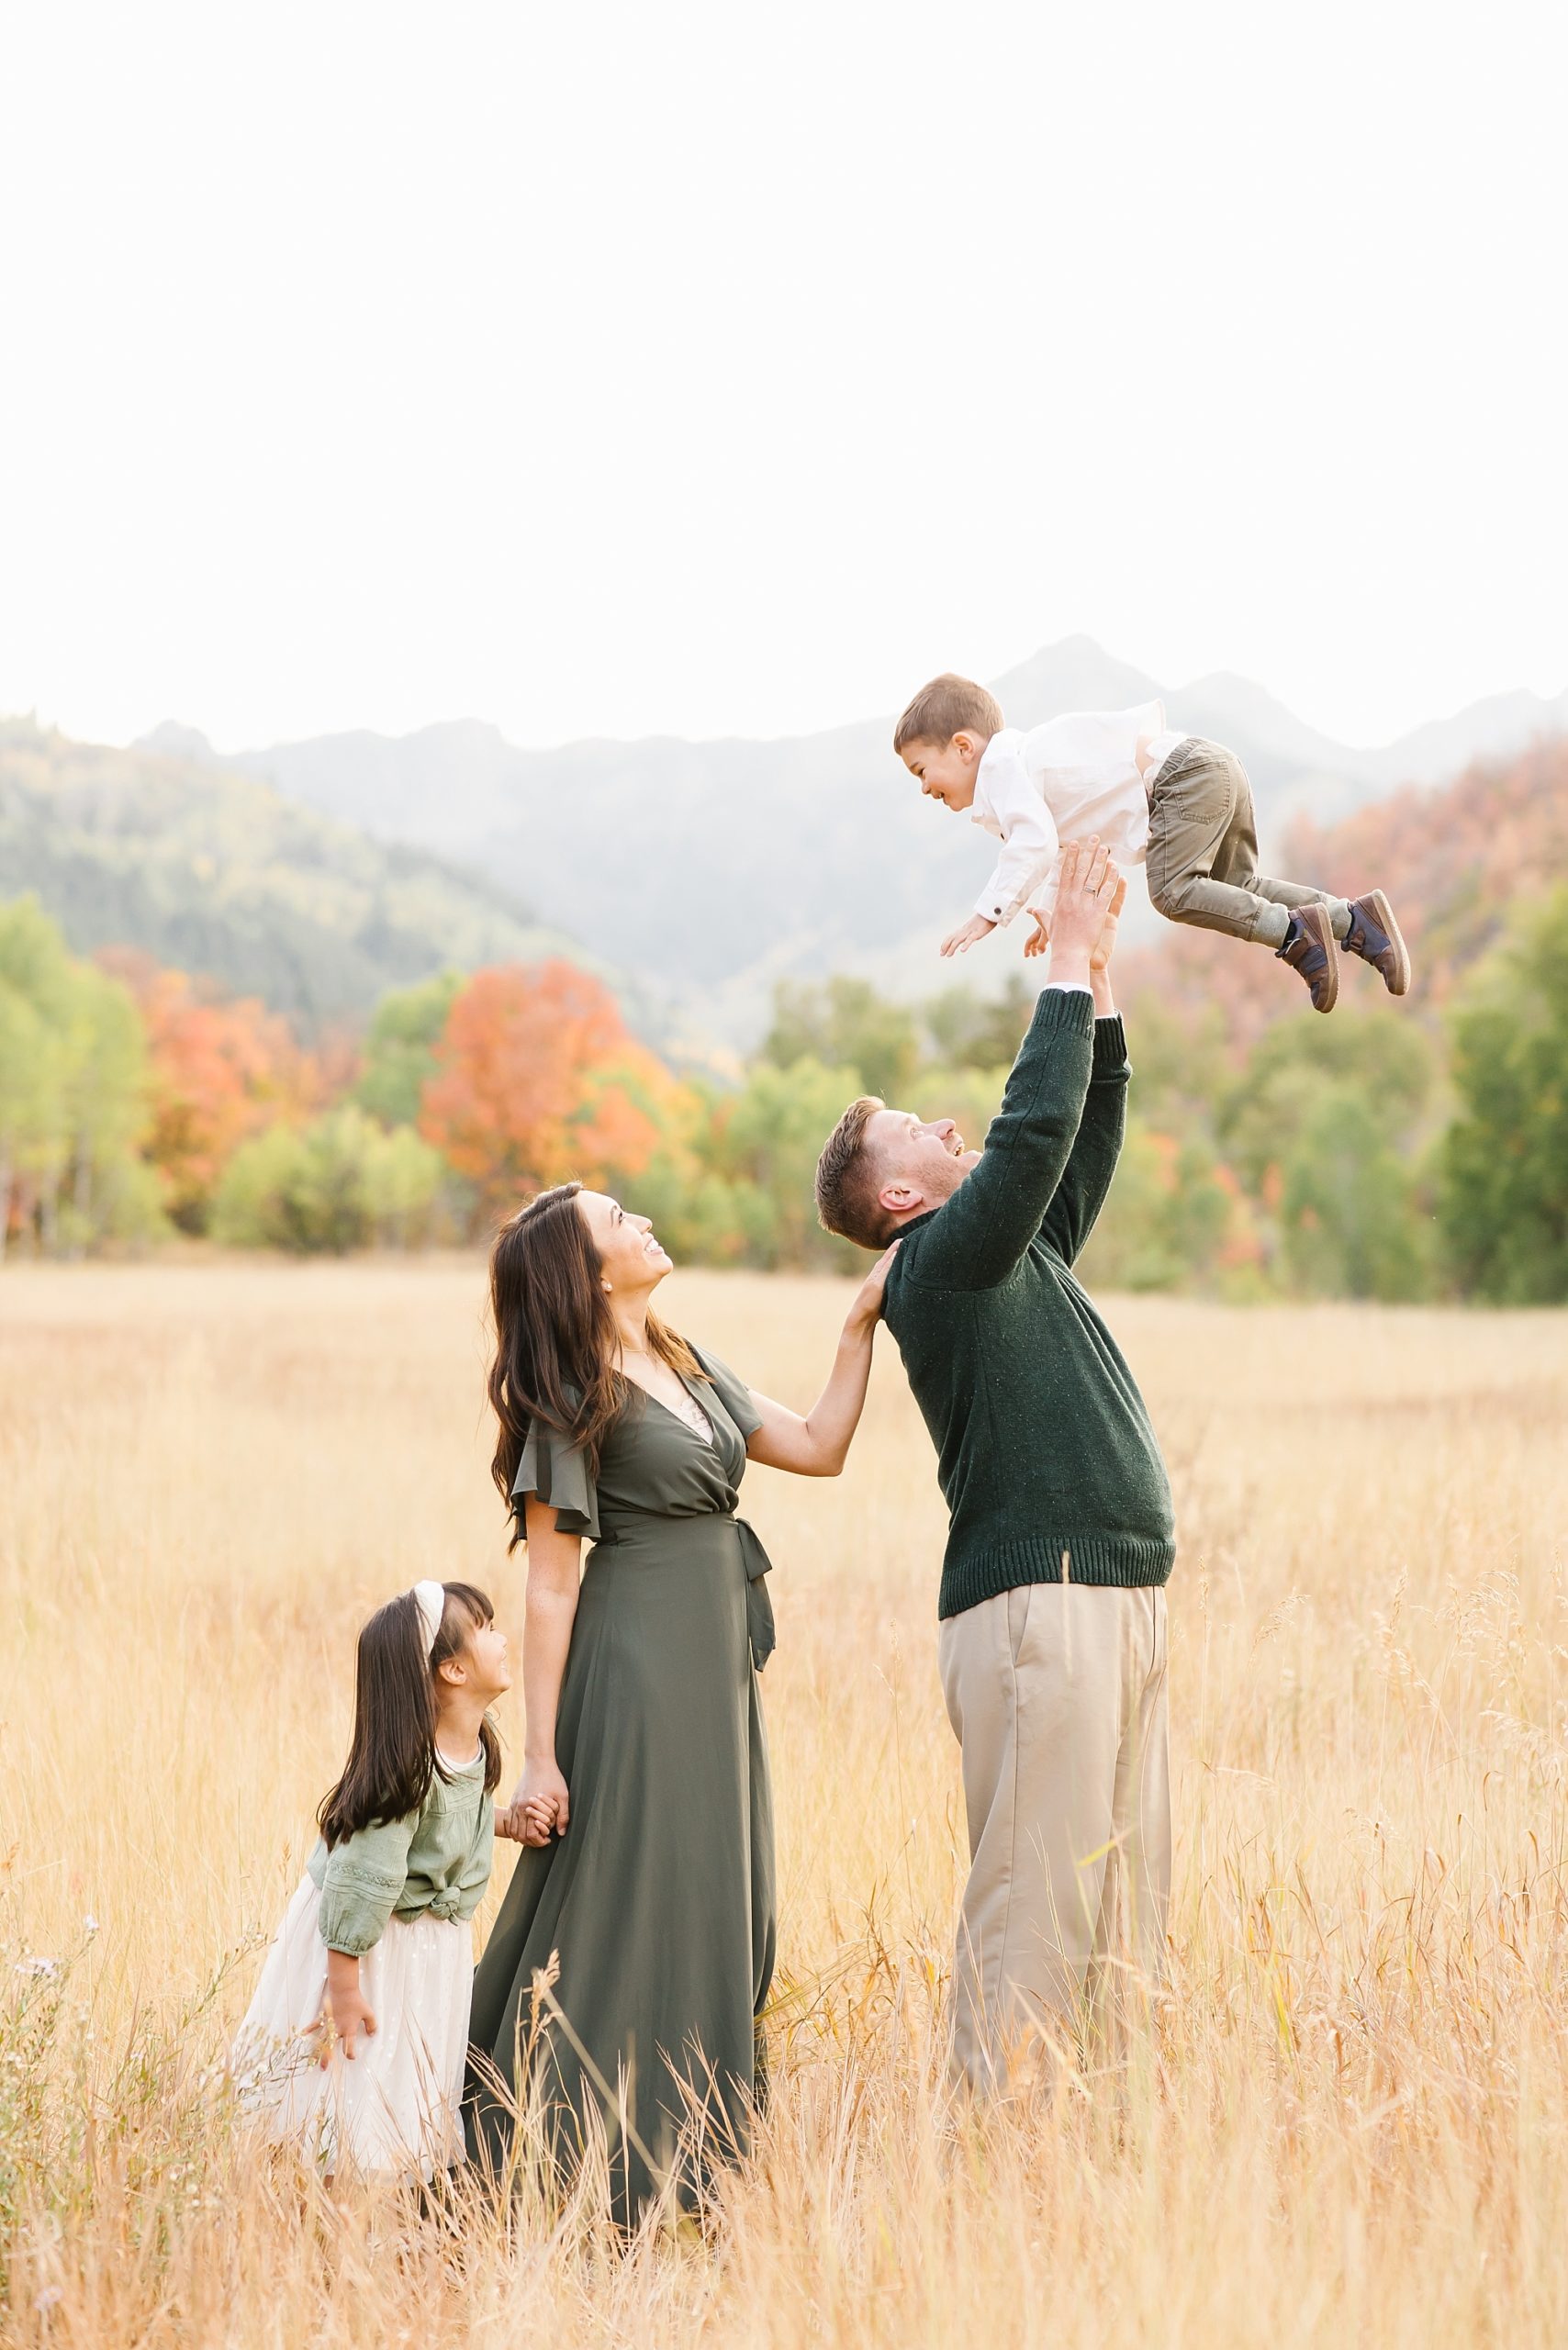 Creating a fun and timeless family portrait session